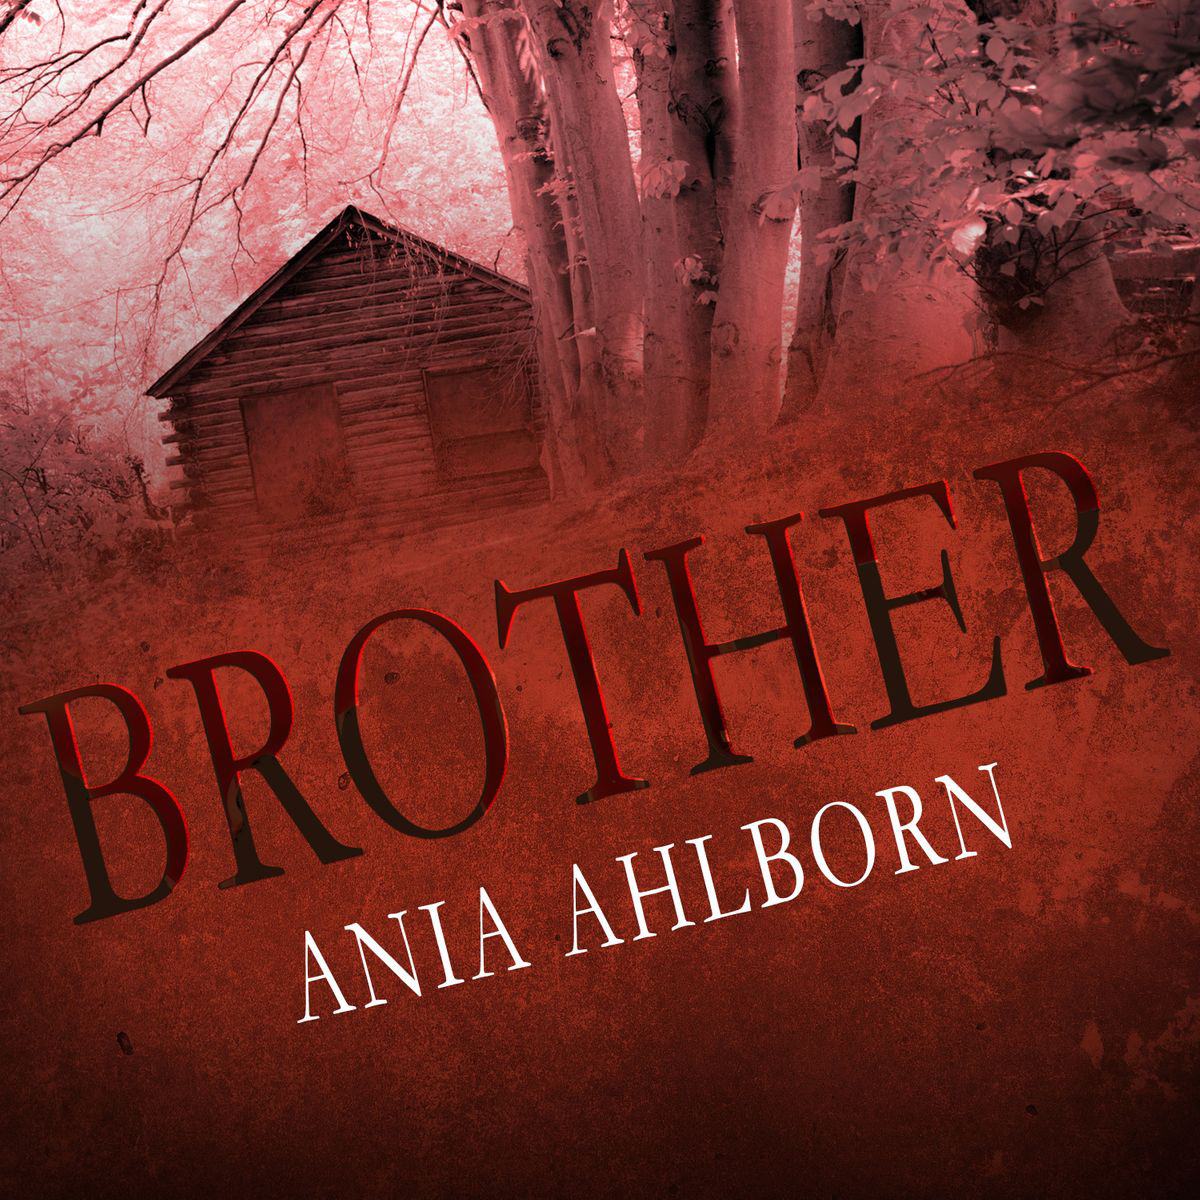 brotherband book 8 release